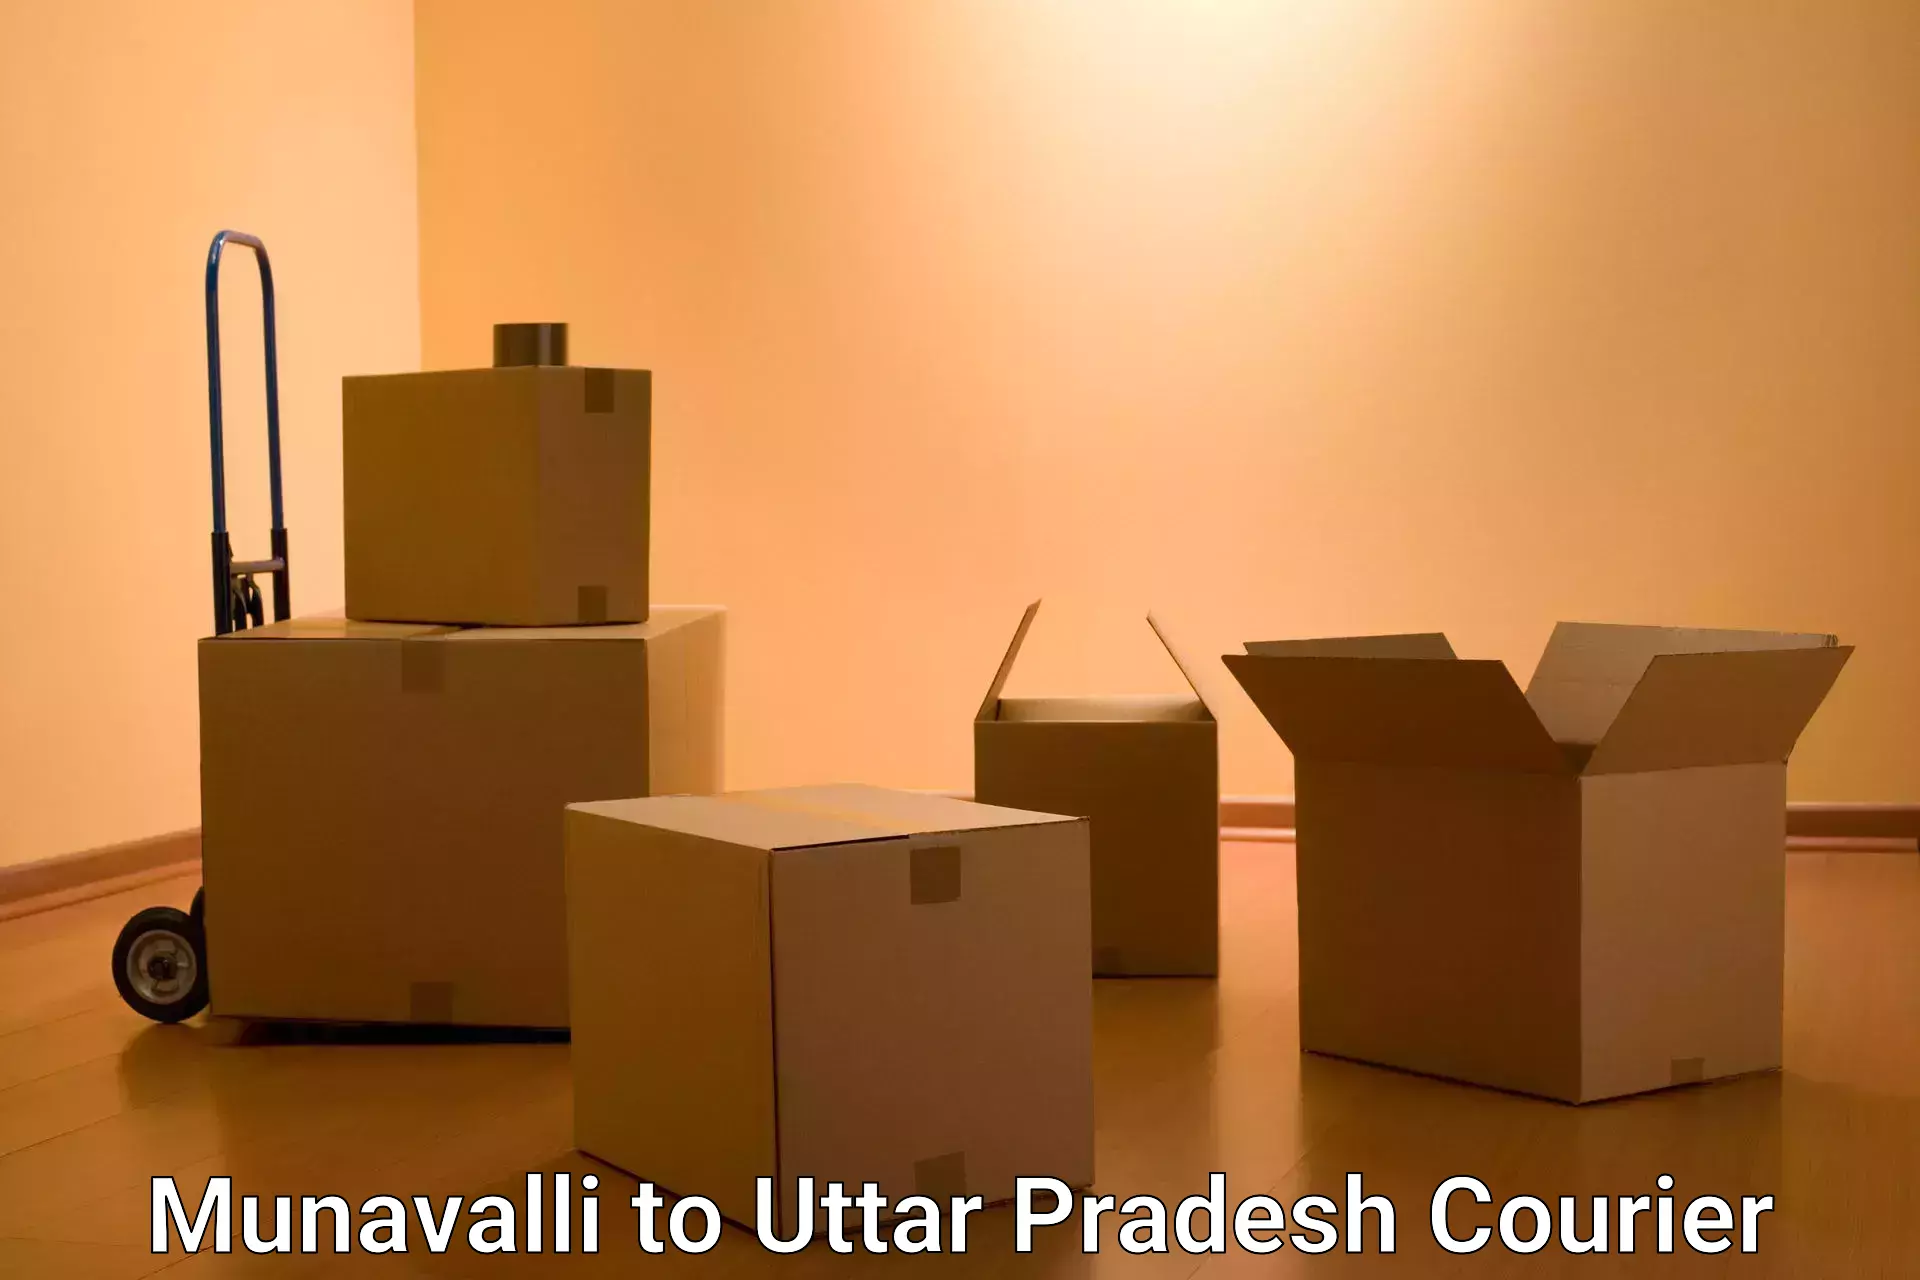 Customized delivery options Munavalli to Fatehabad Agra